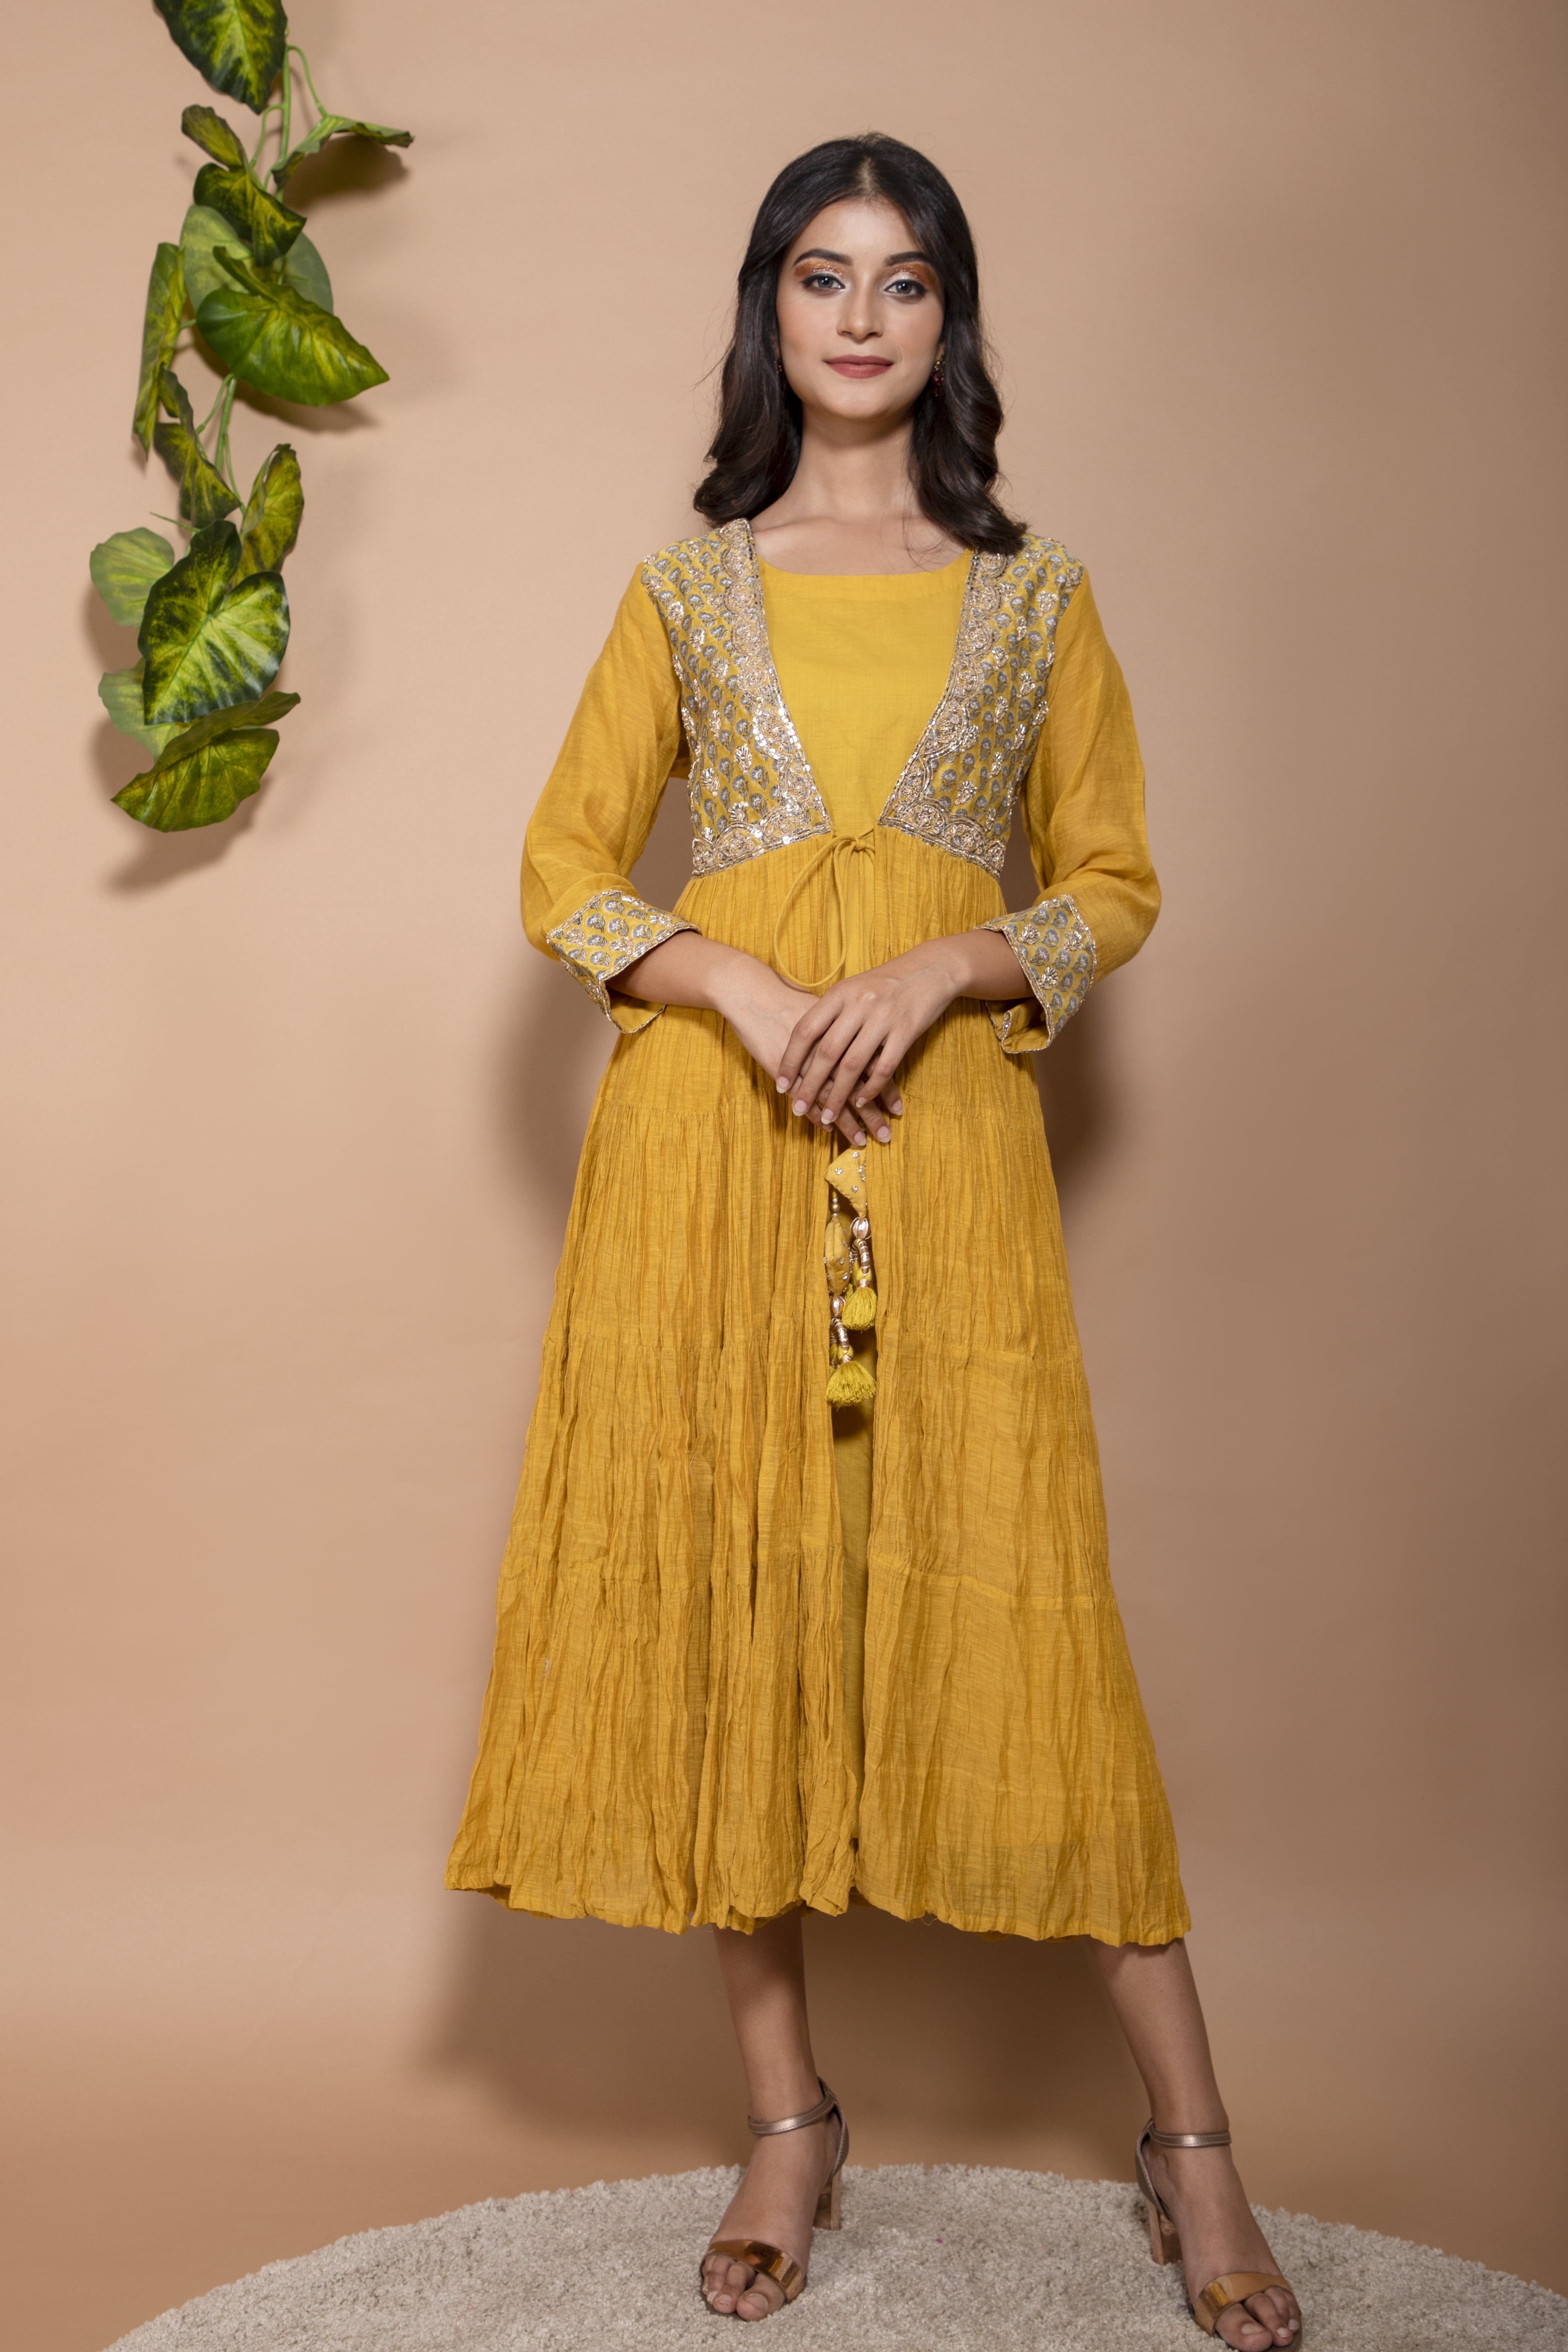 KAARAH BY KAAVYA | Chanderi jacket tiered anarkali with a printed yoke and hand work on the yoke and tassels in the front undefined